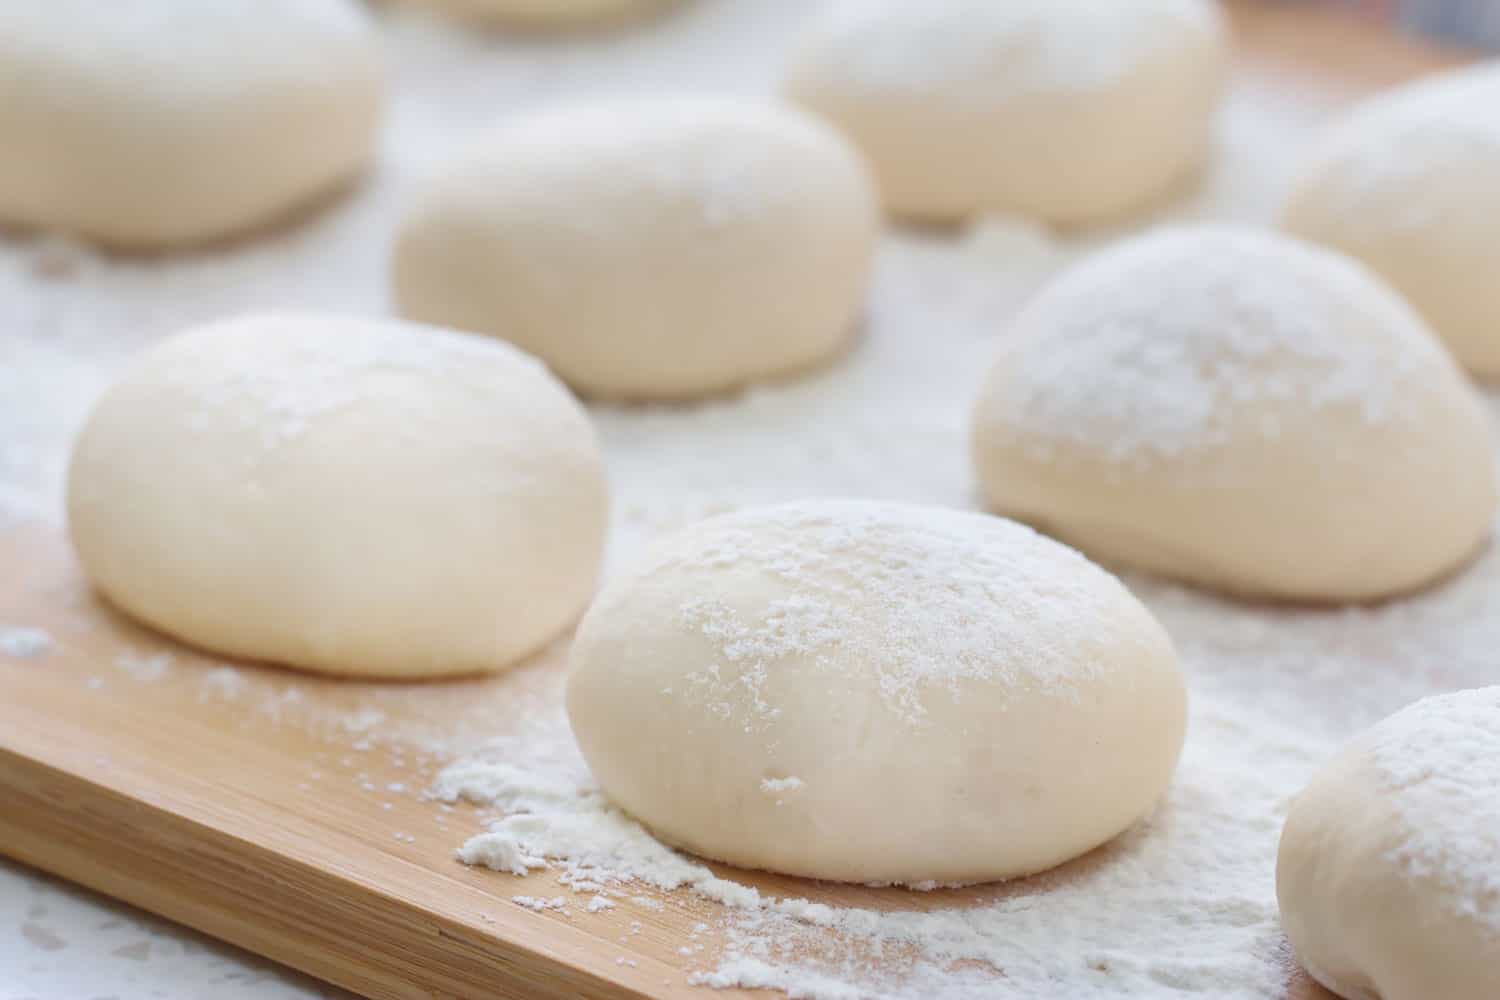 Perfectly made dough ready for baking and making pizza